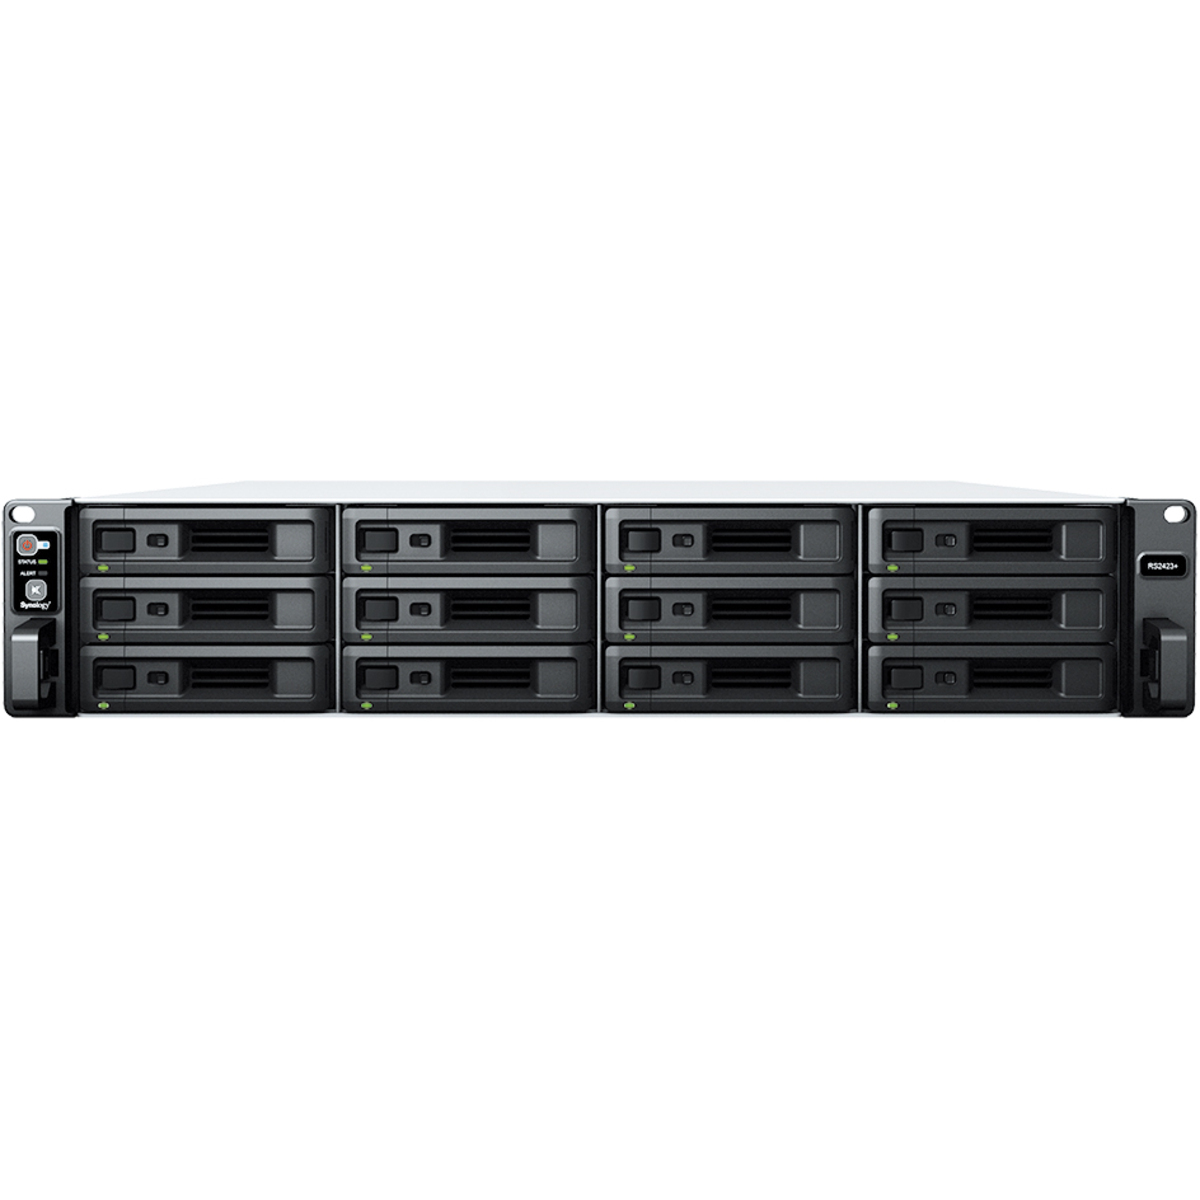 Synology RackStation RS2423RP+ 154tb 12-Bay RackMount Multimedia / Power User / Business NAS - Network Attached Storage Device 7x22tb Western Digital Ultrastar HC580 WUH722422ALE6L4 3.5 7200rpm SATA 6Gb/s HDD ENTERPRISE Class Drives Installed - Burn-In Tested - FREE RAM UPGRADE RackStation RS2423RP+